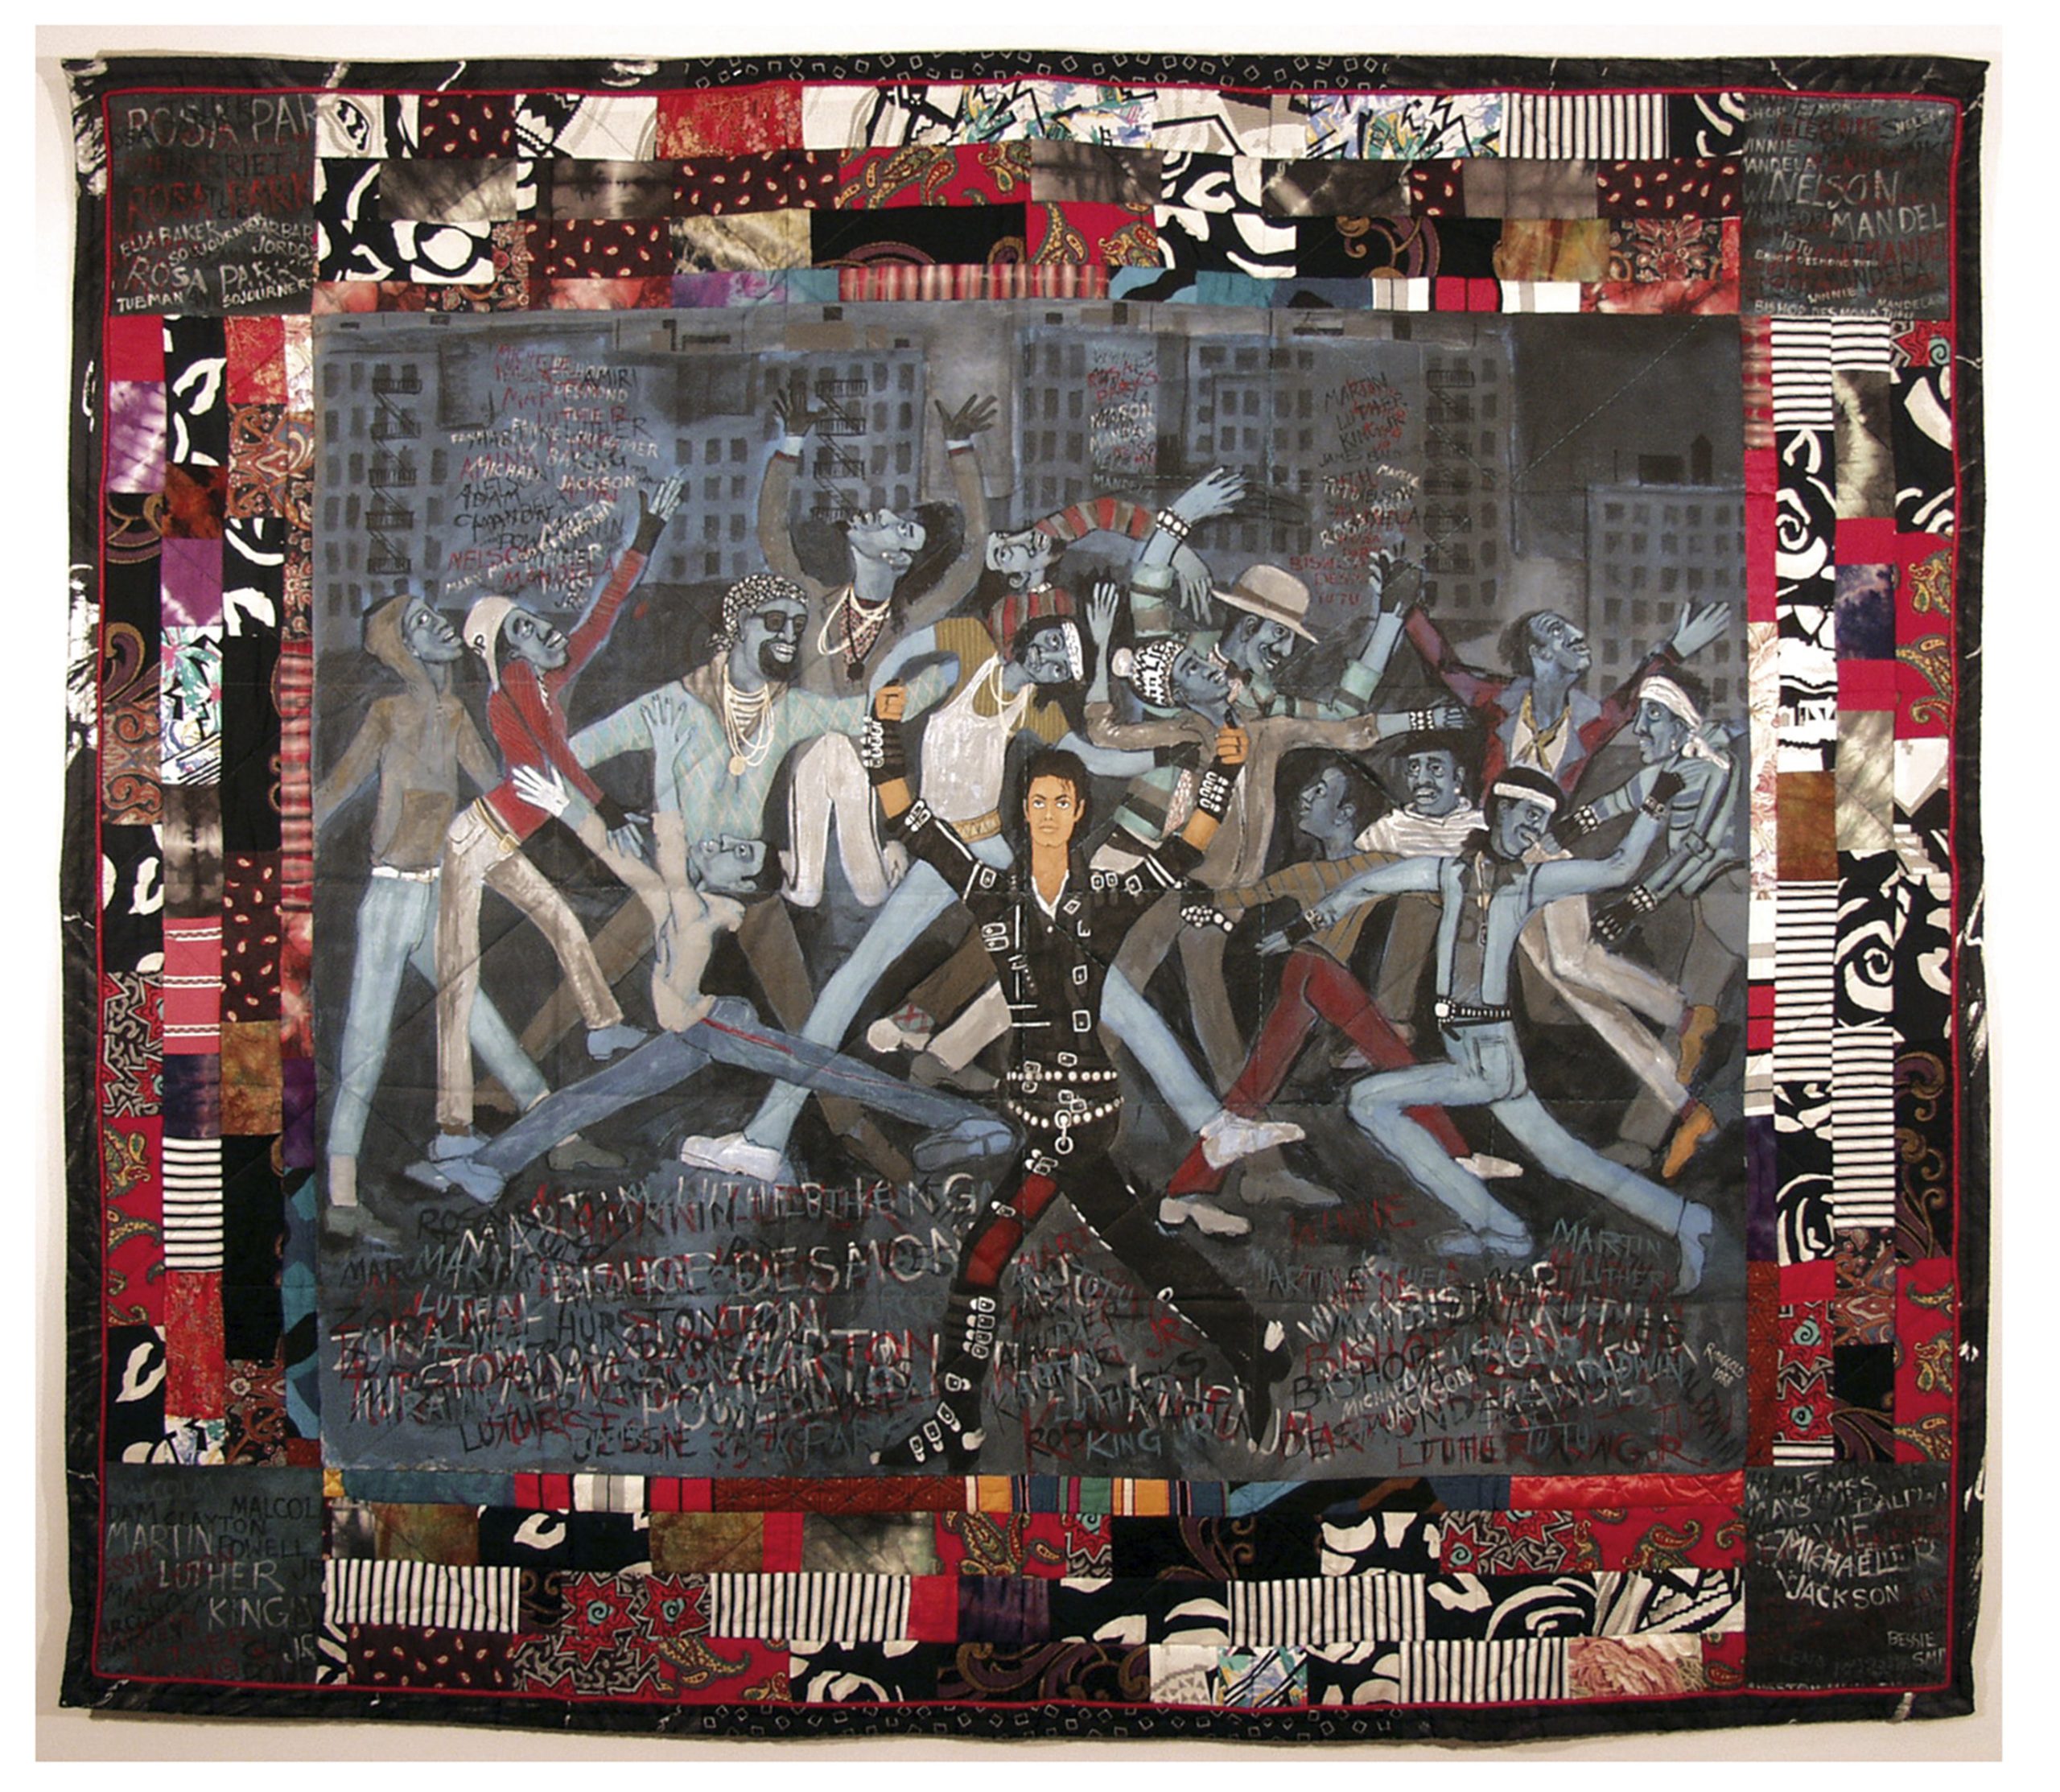 Michael Jackson ‘Who’s Bad’ Quilt Artwork By Artist Faith Ringgold